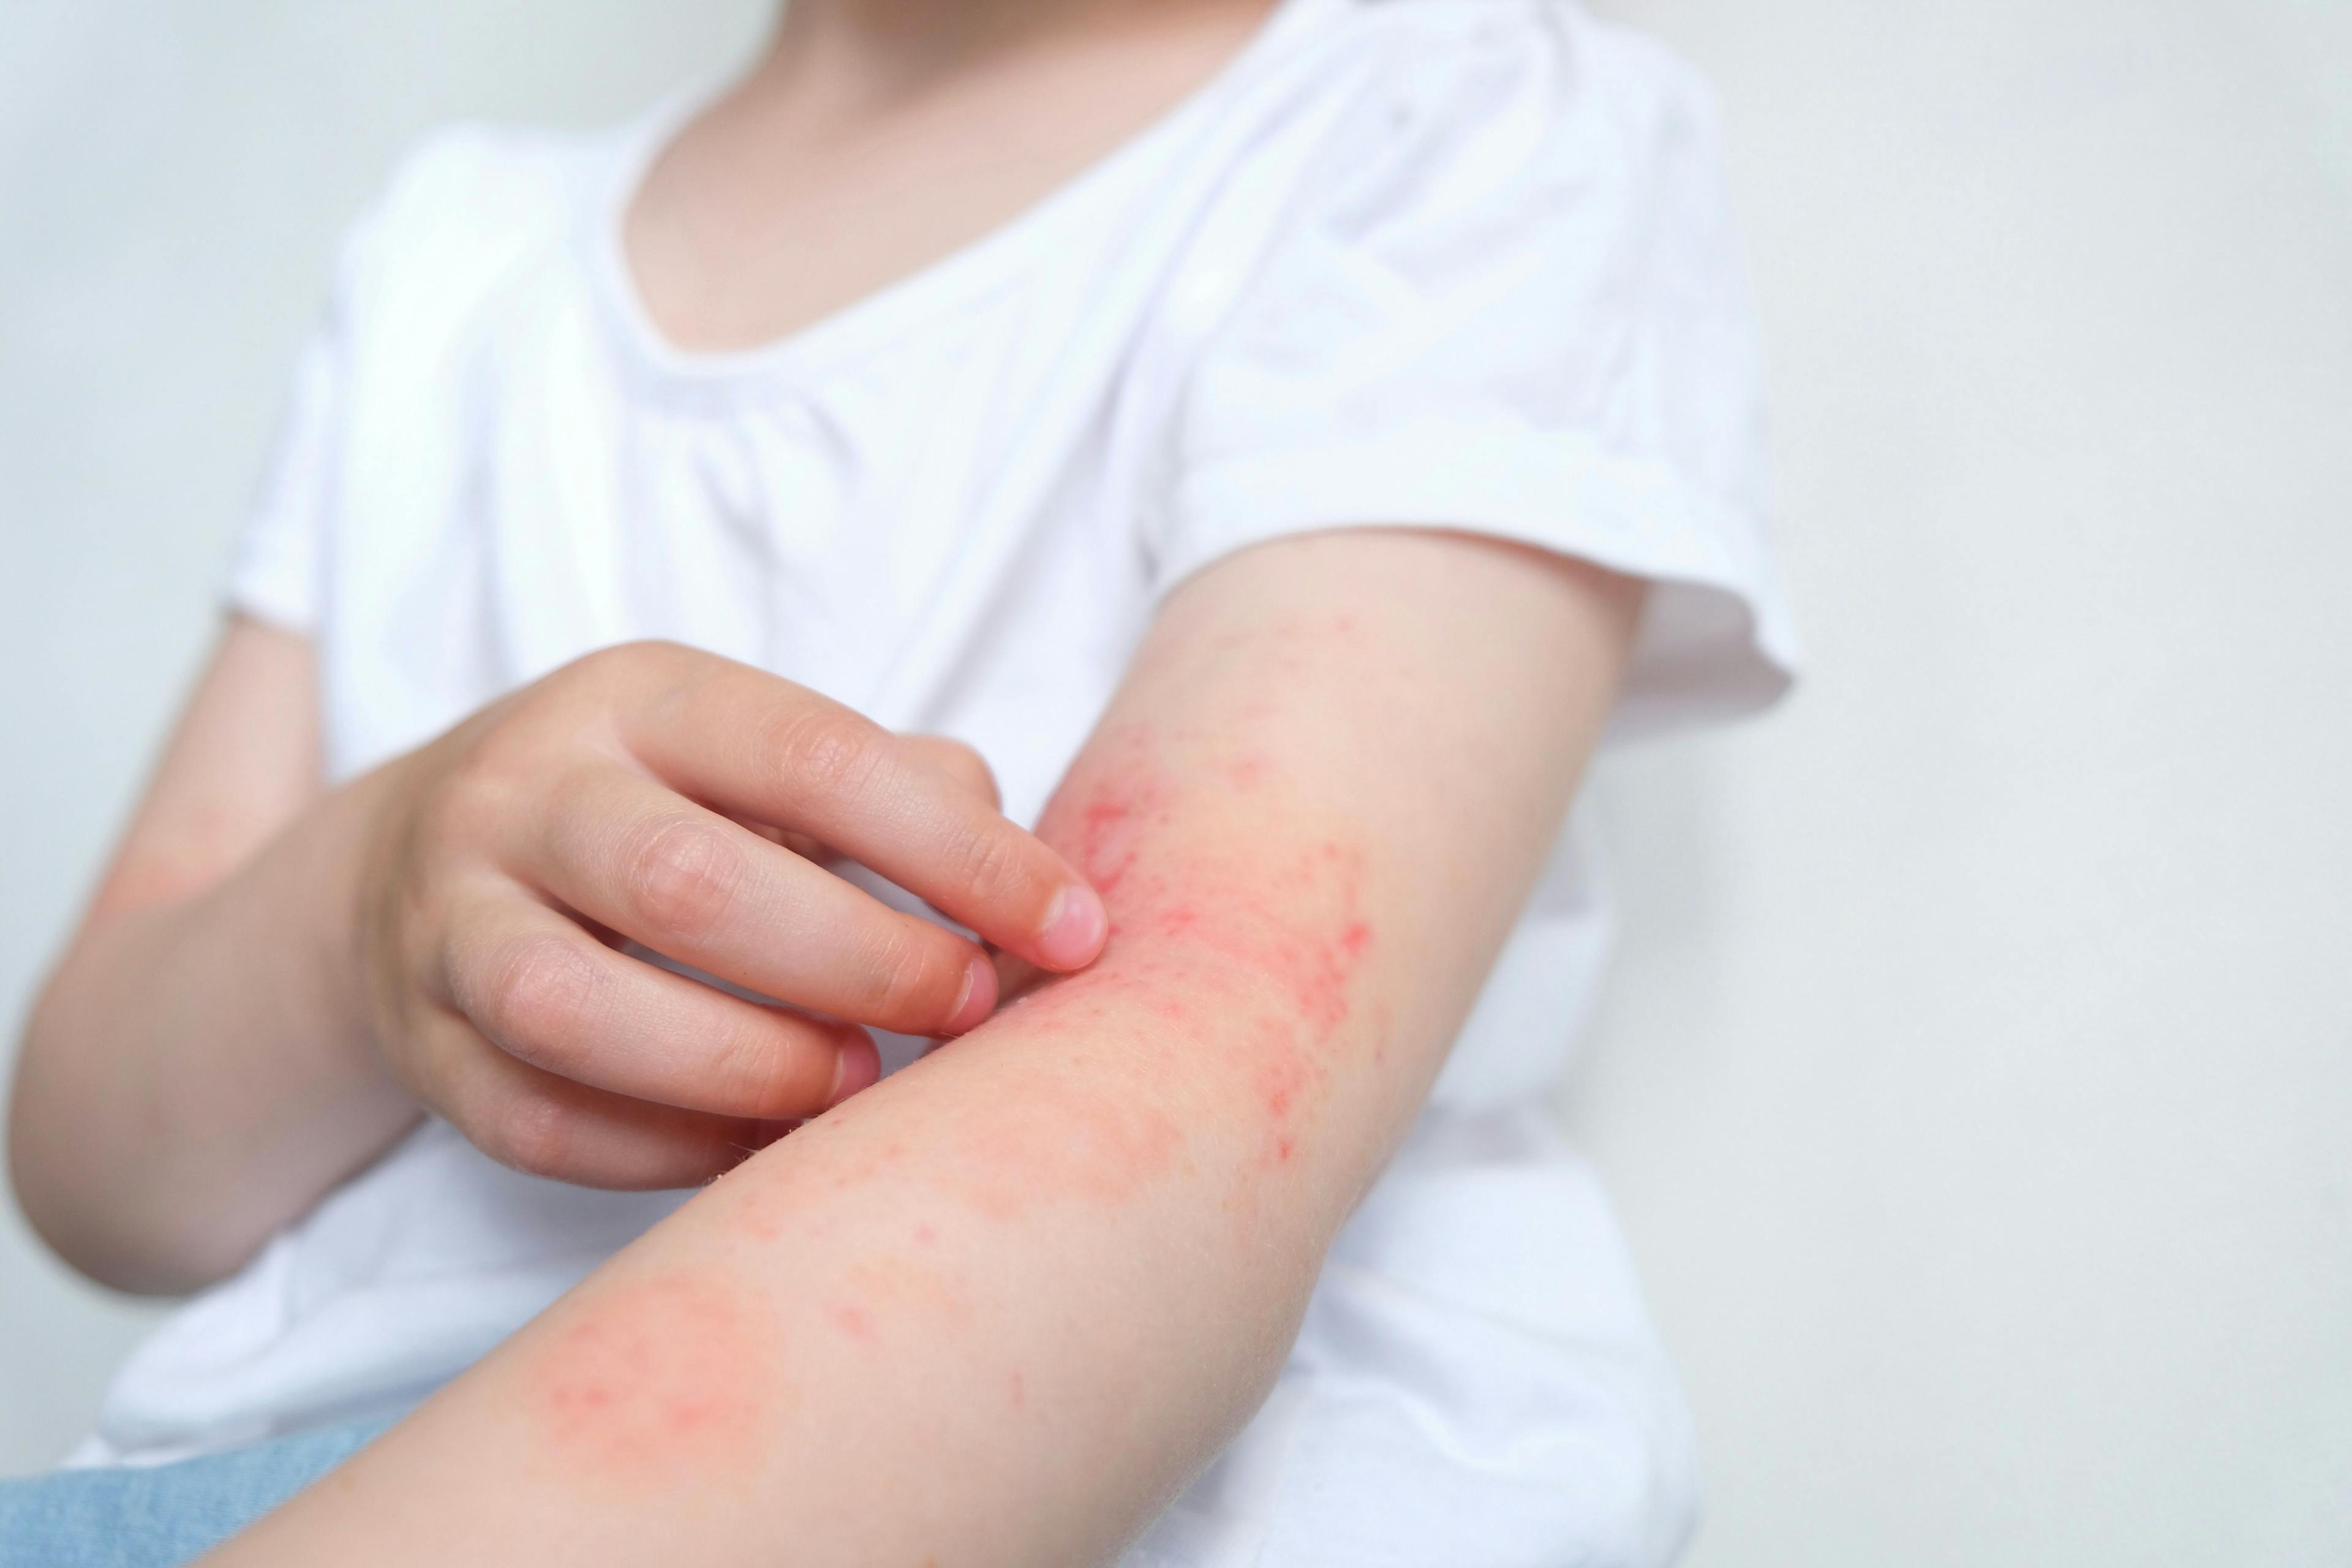 Dosage and immunosuppression should be taken into account when biologics are used for children with different skin conditions | Image credit: Марина Терехова - stock.adobe.com